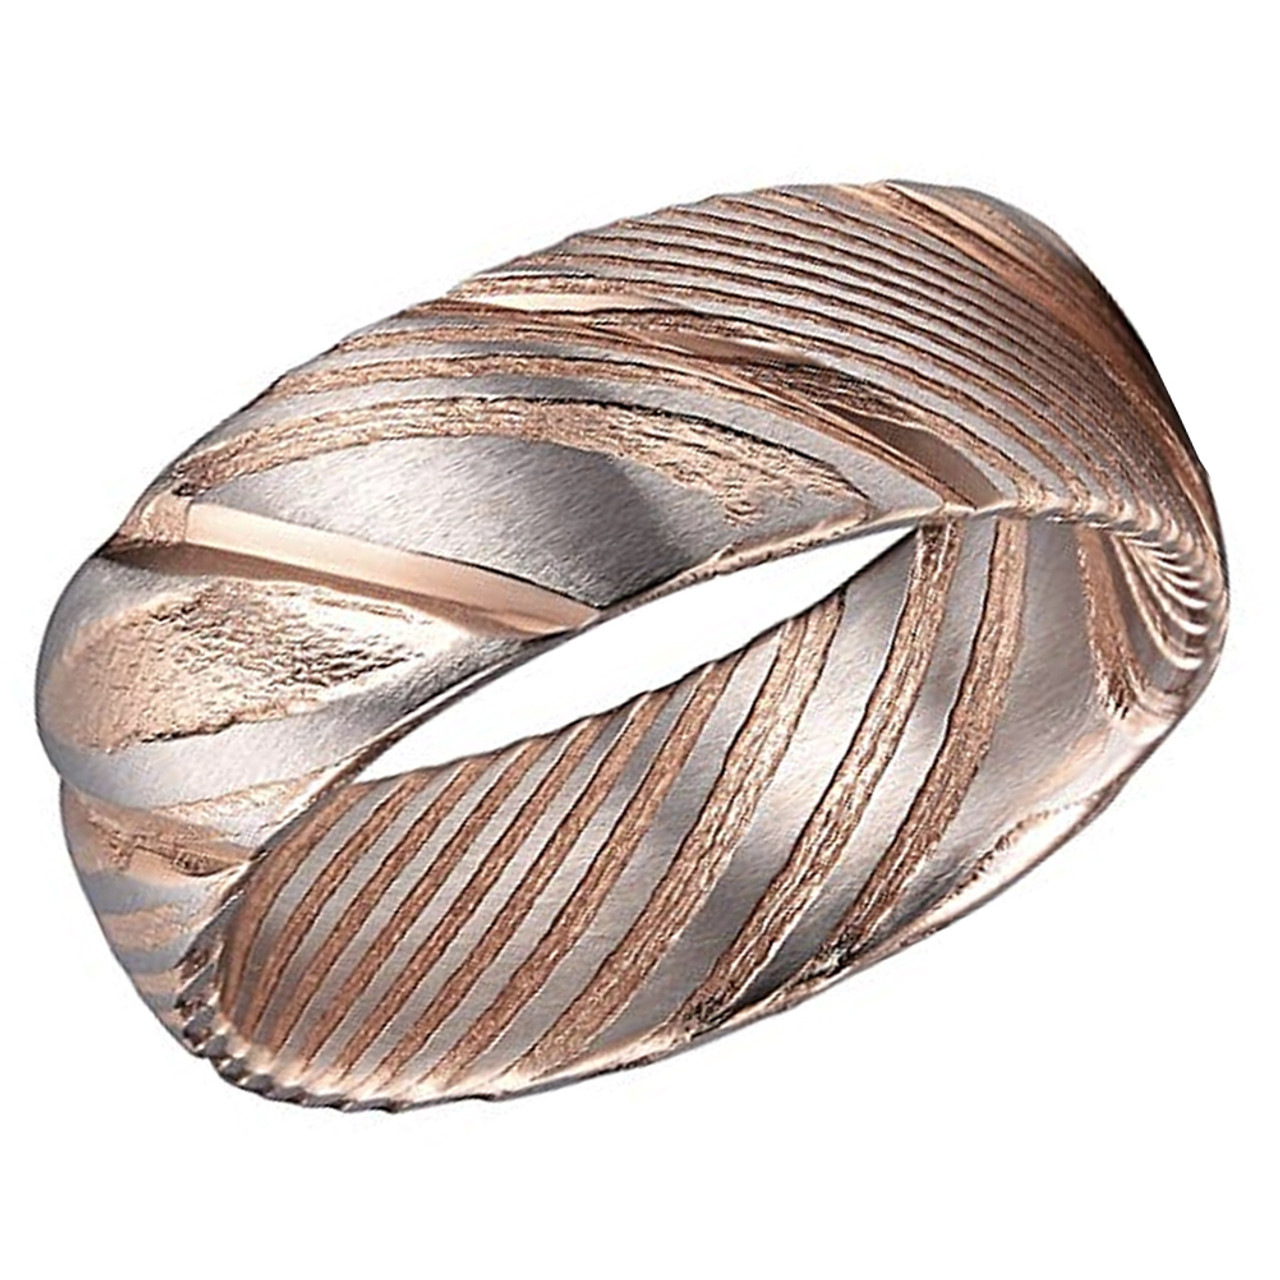 (8mm) Unisex or Men's Damascus Steel Ring with 14K Rose Gold and Silver Duo Tones. Damascus Wedding Band with Grooved Domed Top.